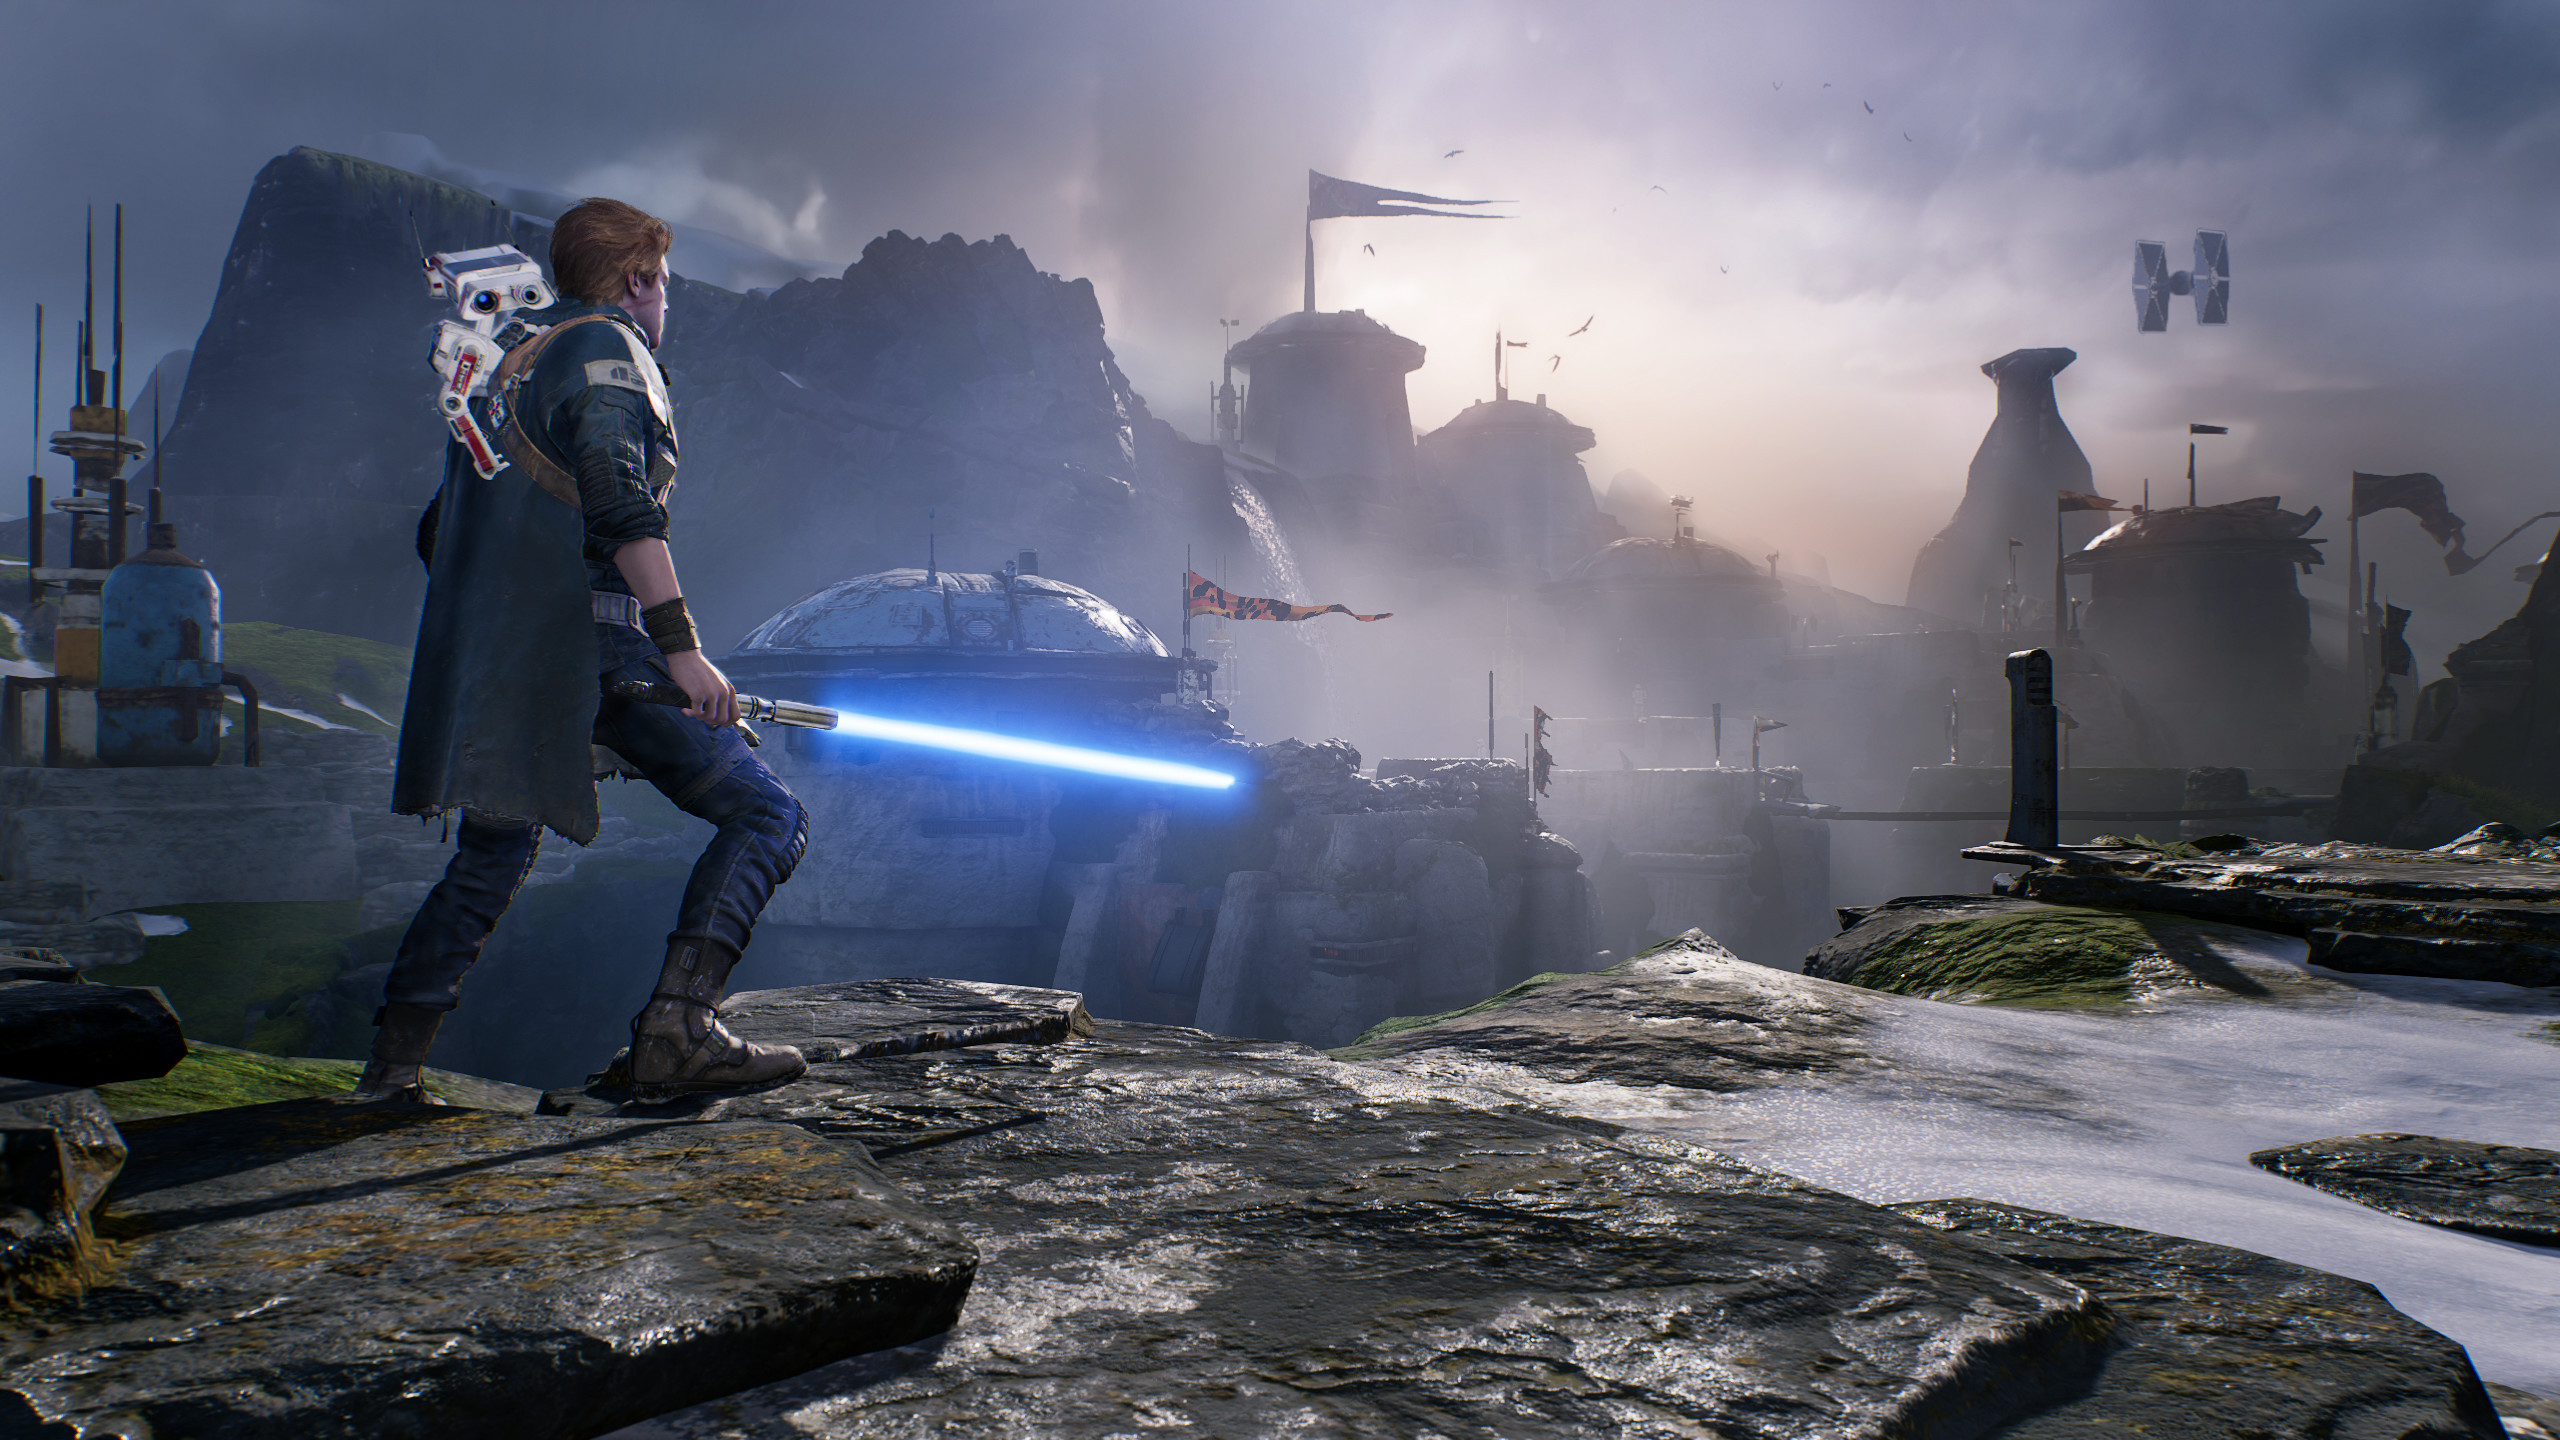 The main character from Jedi Fallen Order looking across a cavern.